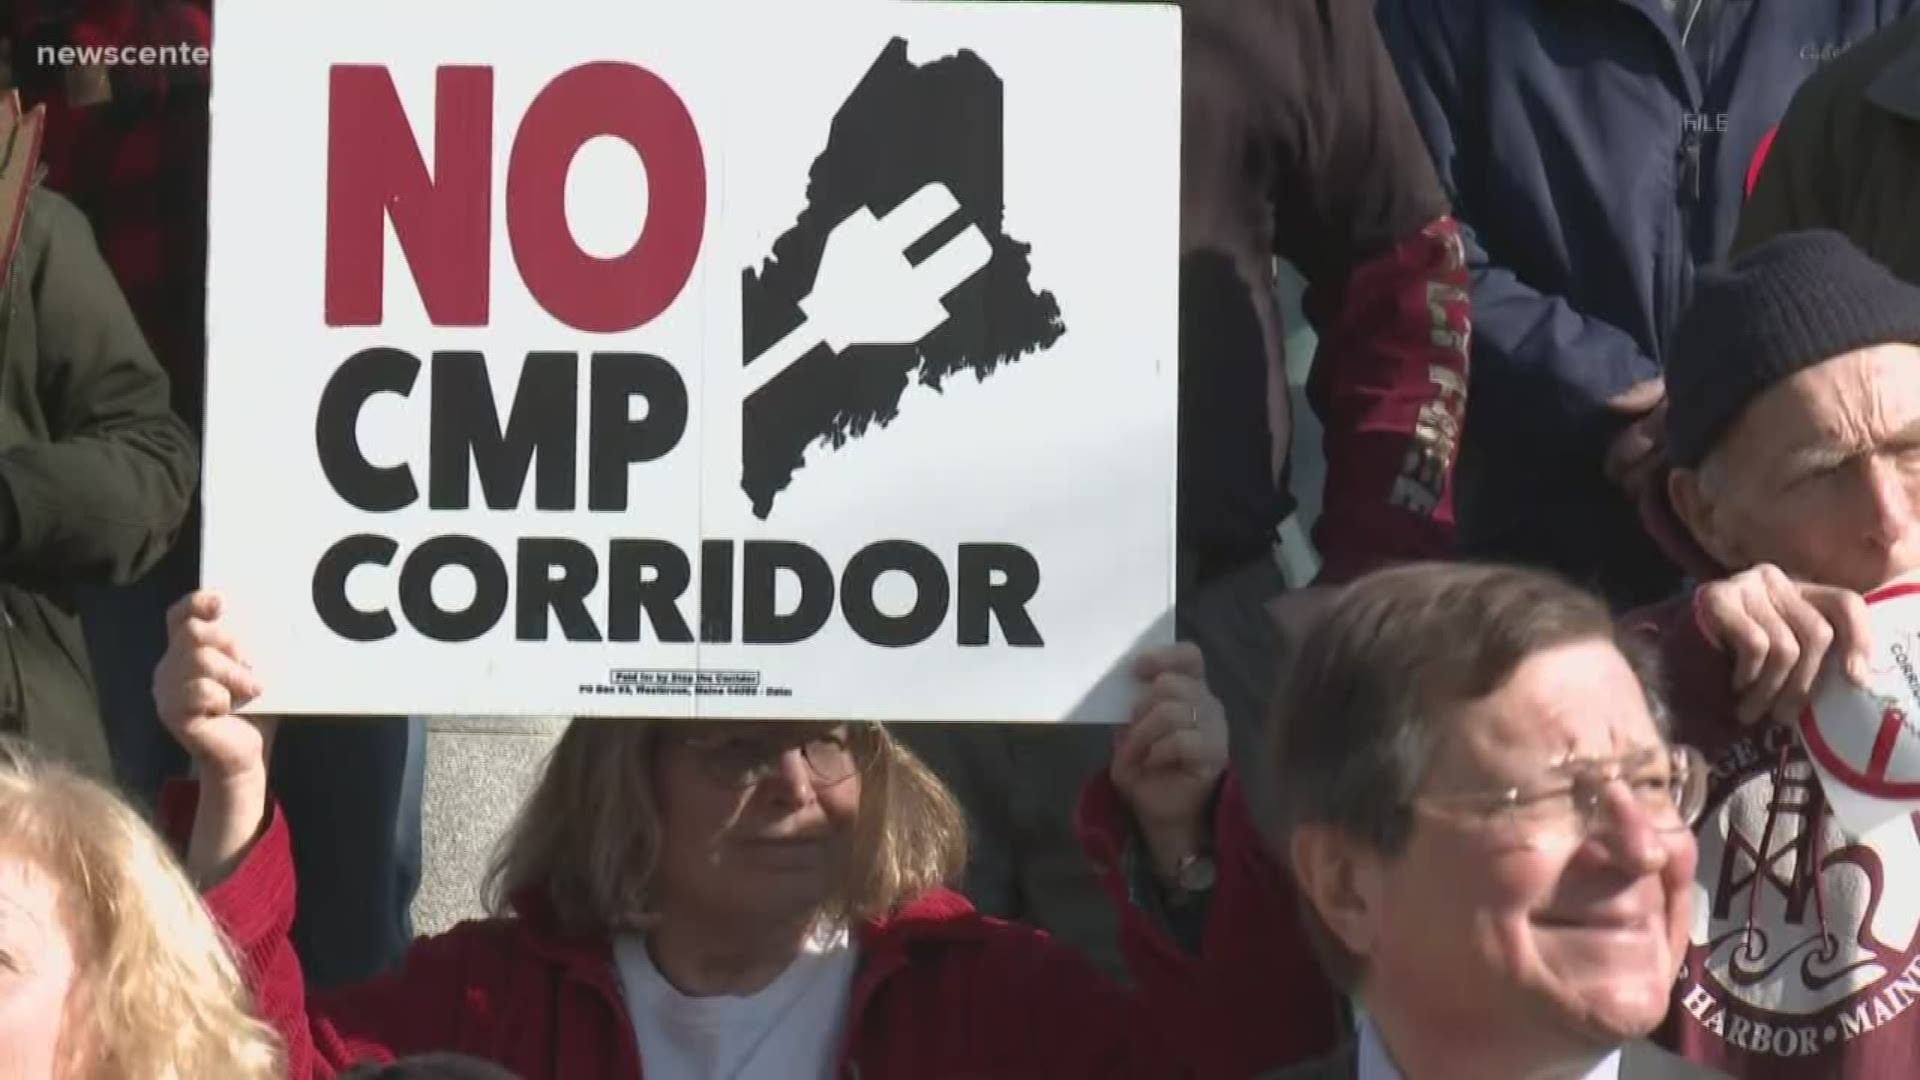 The referendum to block CMP transmission line will go forward
A citizens' initiative "to reject the New England Clean Energy Connect Transmission Project" has collec